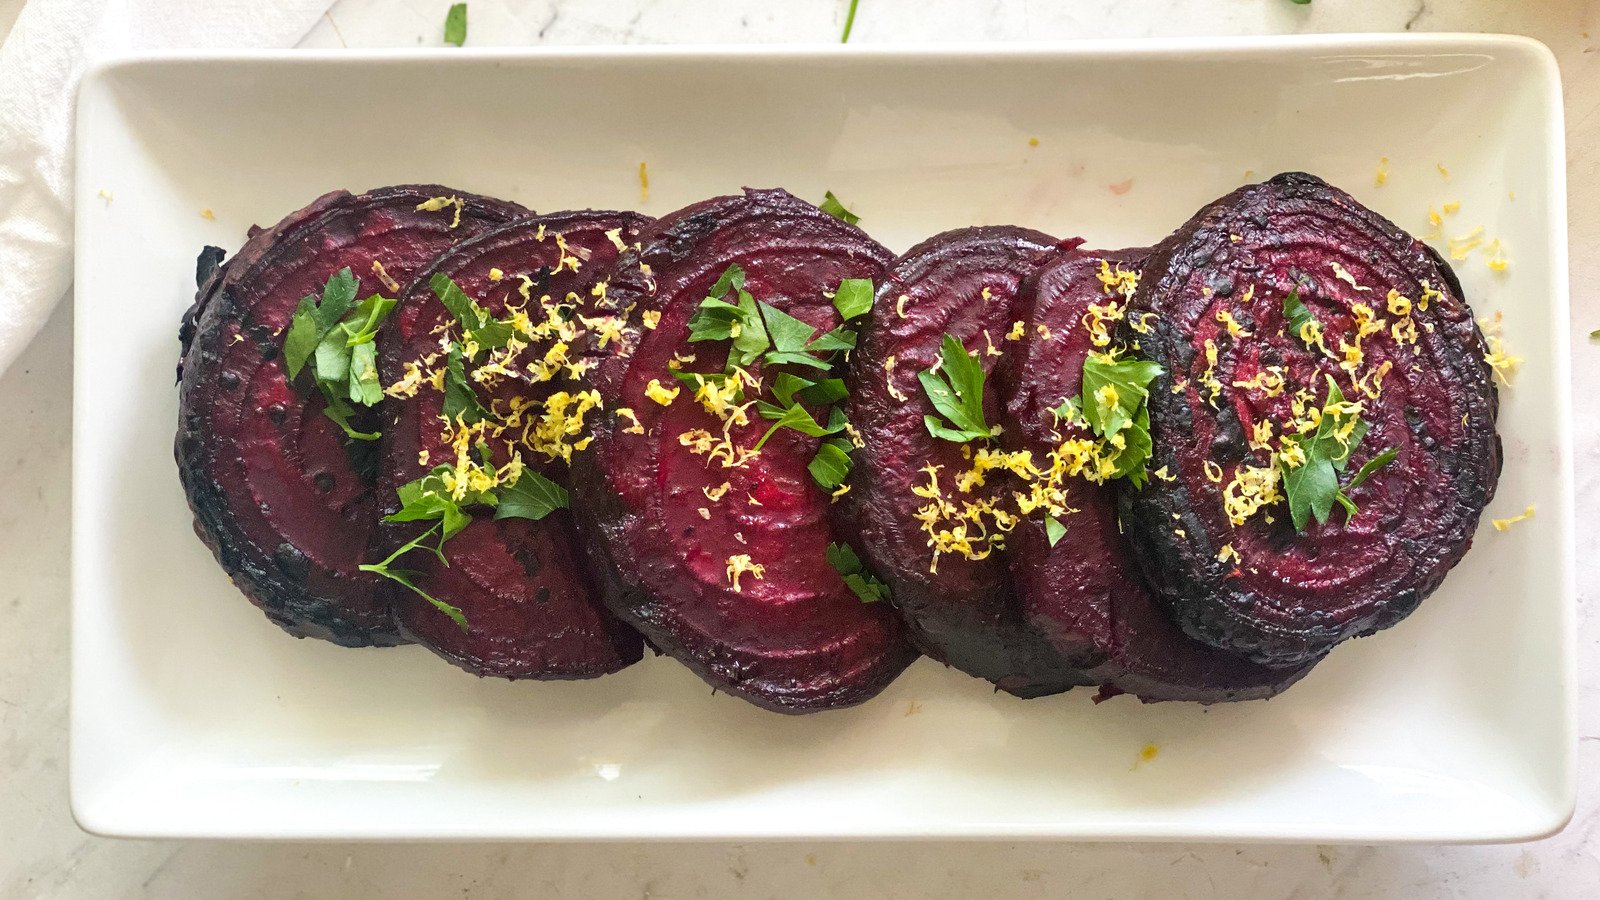 Grilled Beets Recipe That Just Made Your Cookouts That Much Better